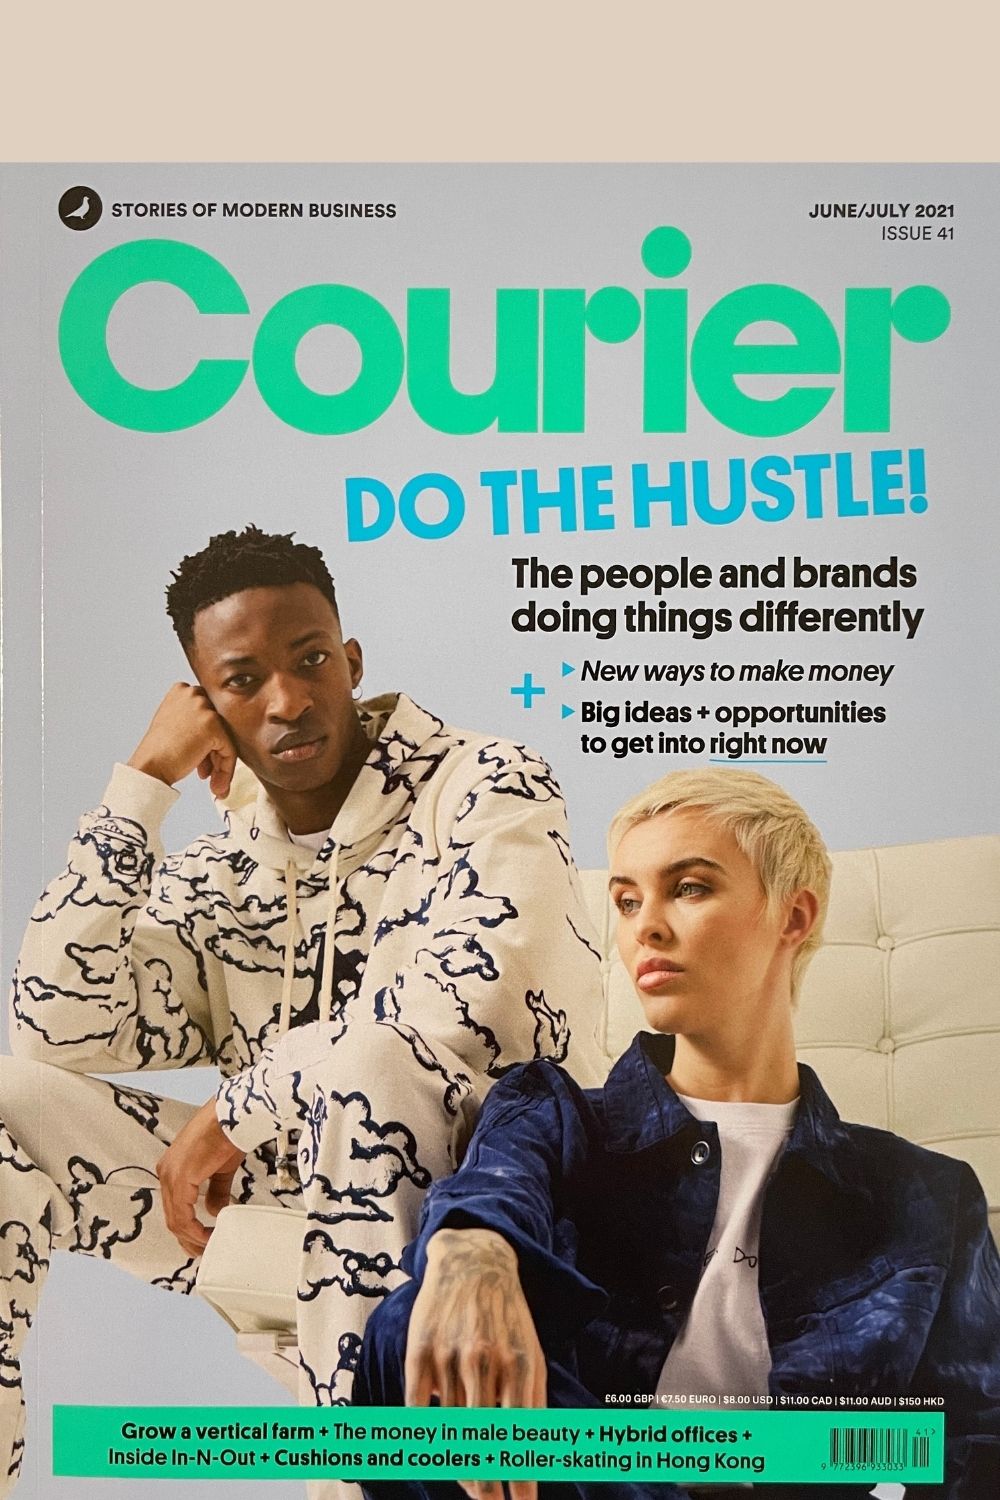 Front cover of Issue 41 of Courier magazine at Pics & Ink